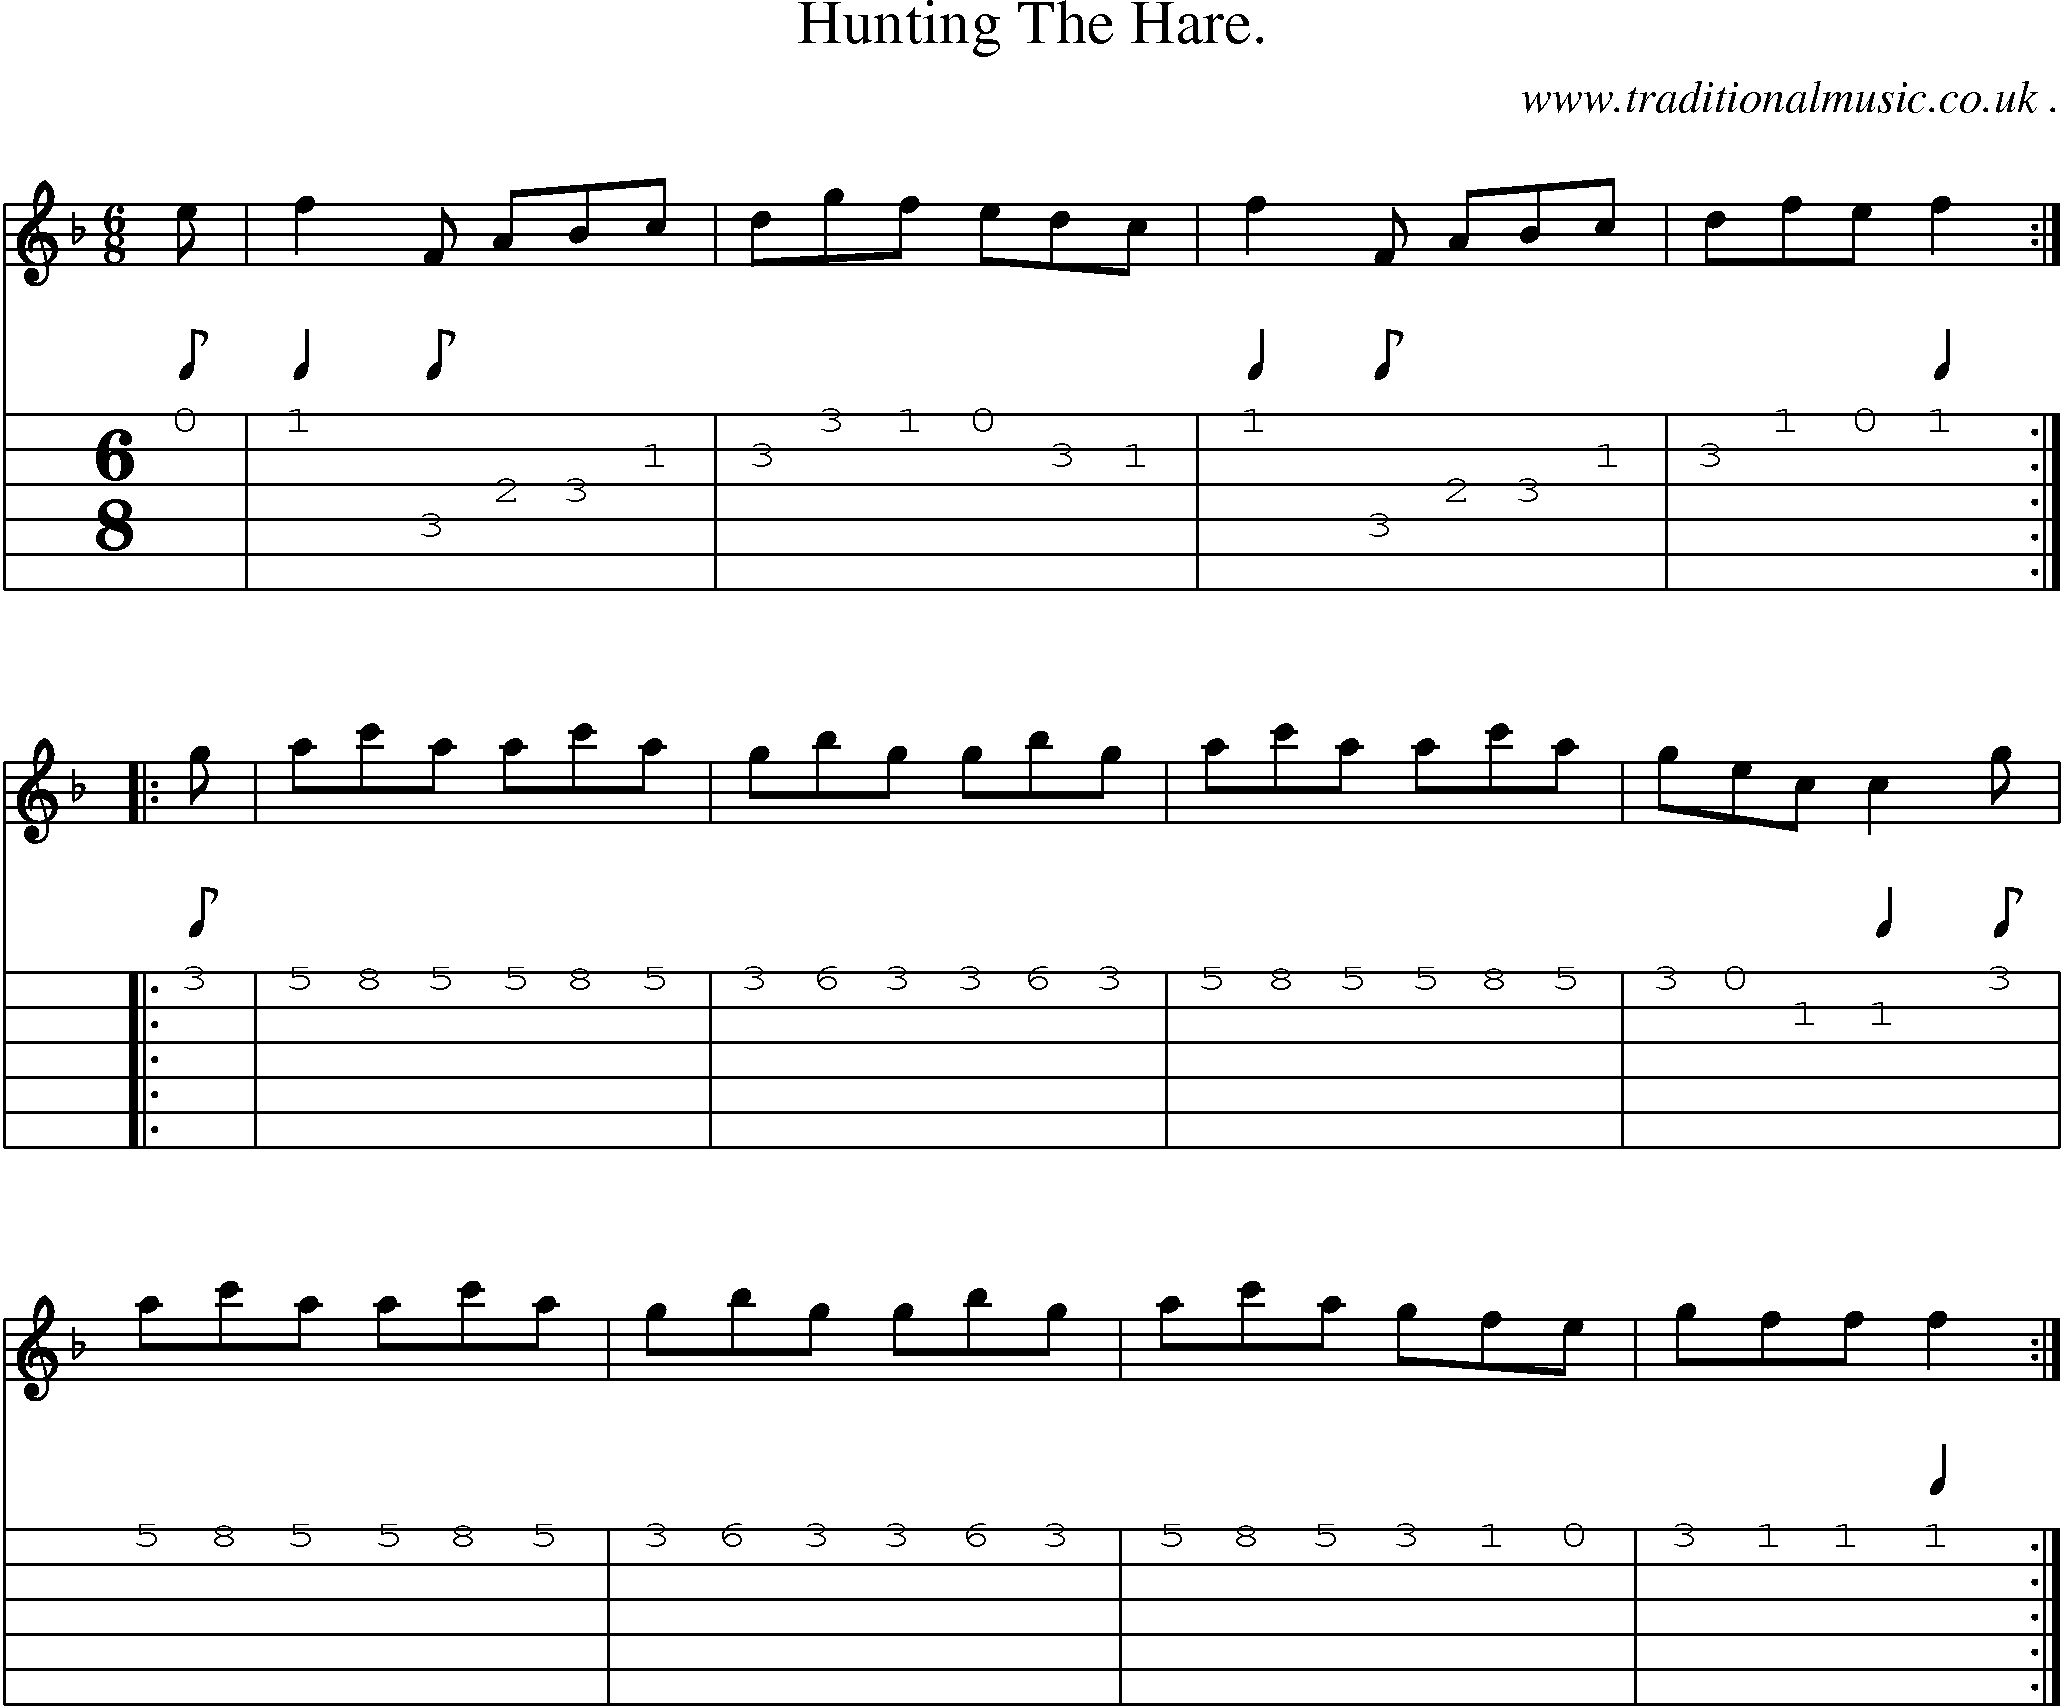 Sheet-Music and Guitar Tabs for Hunting The Hare